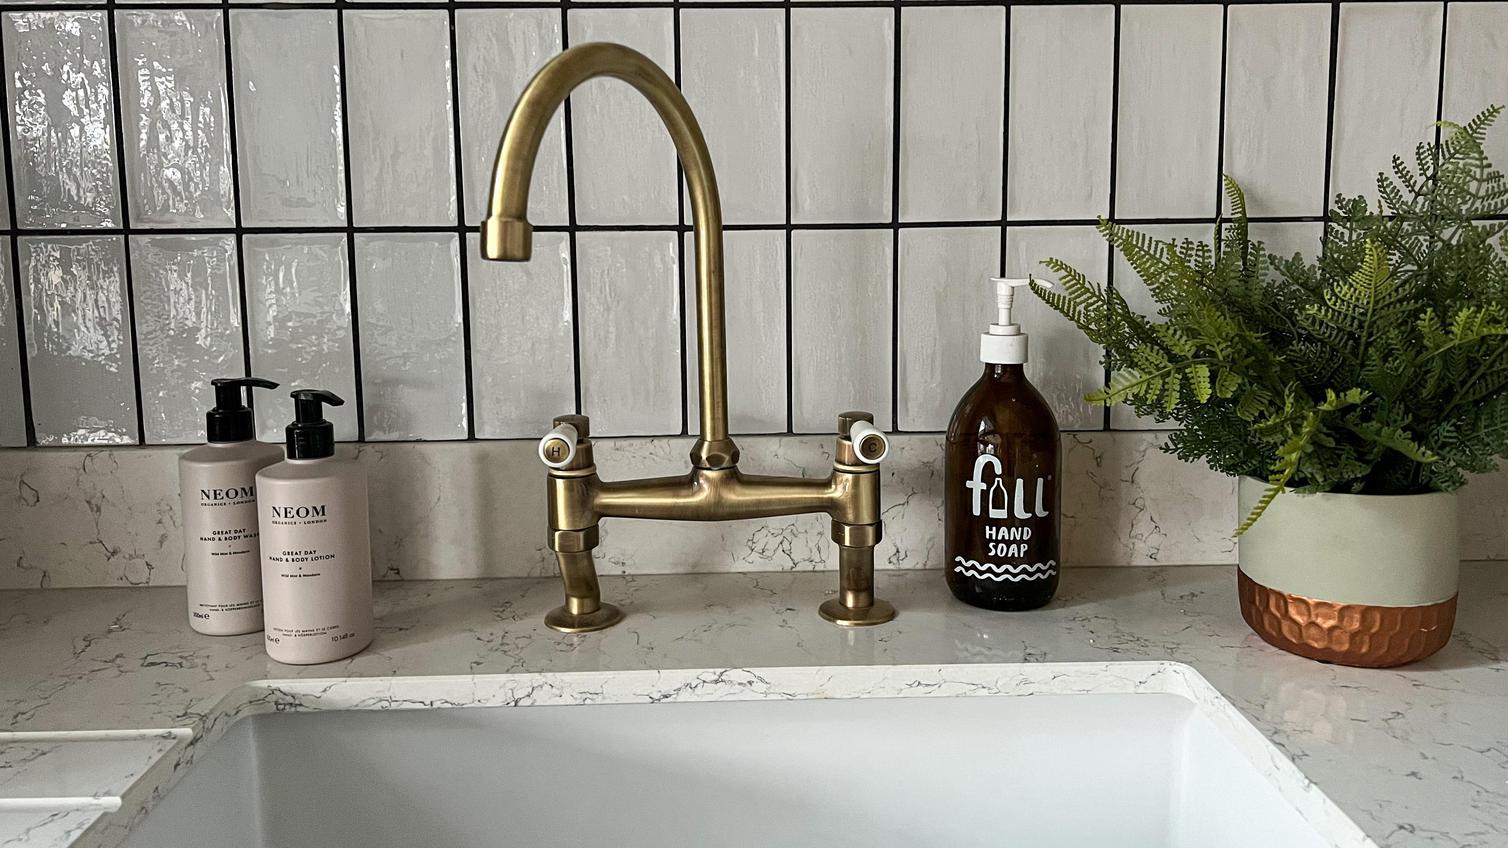 Antique brass swan neck tap with two handles, textured white subway tiles, a white quartz worktop and hand soaps.